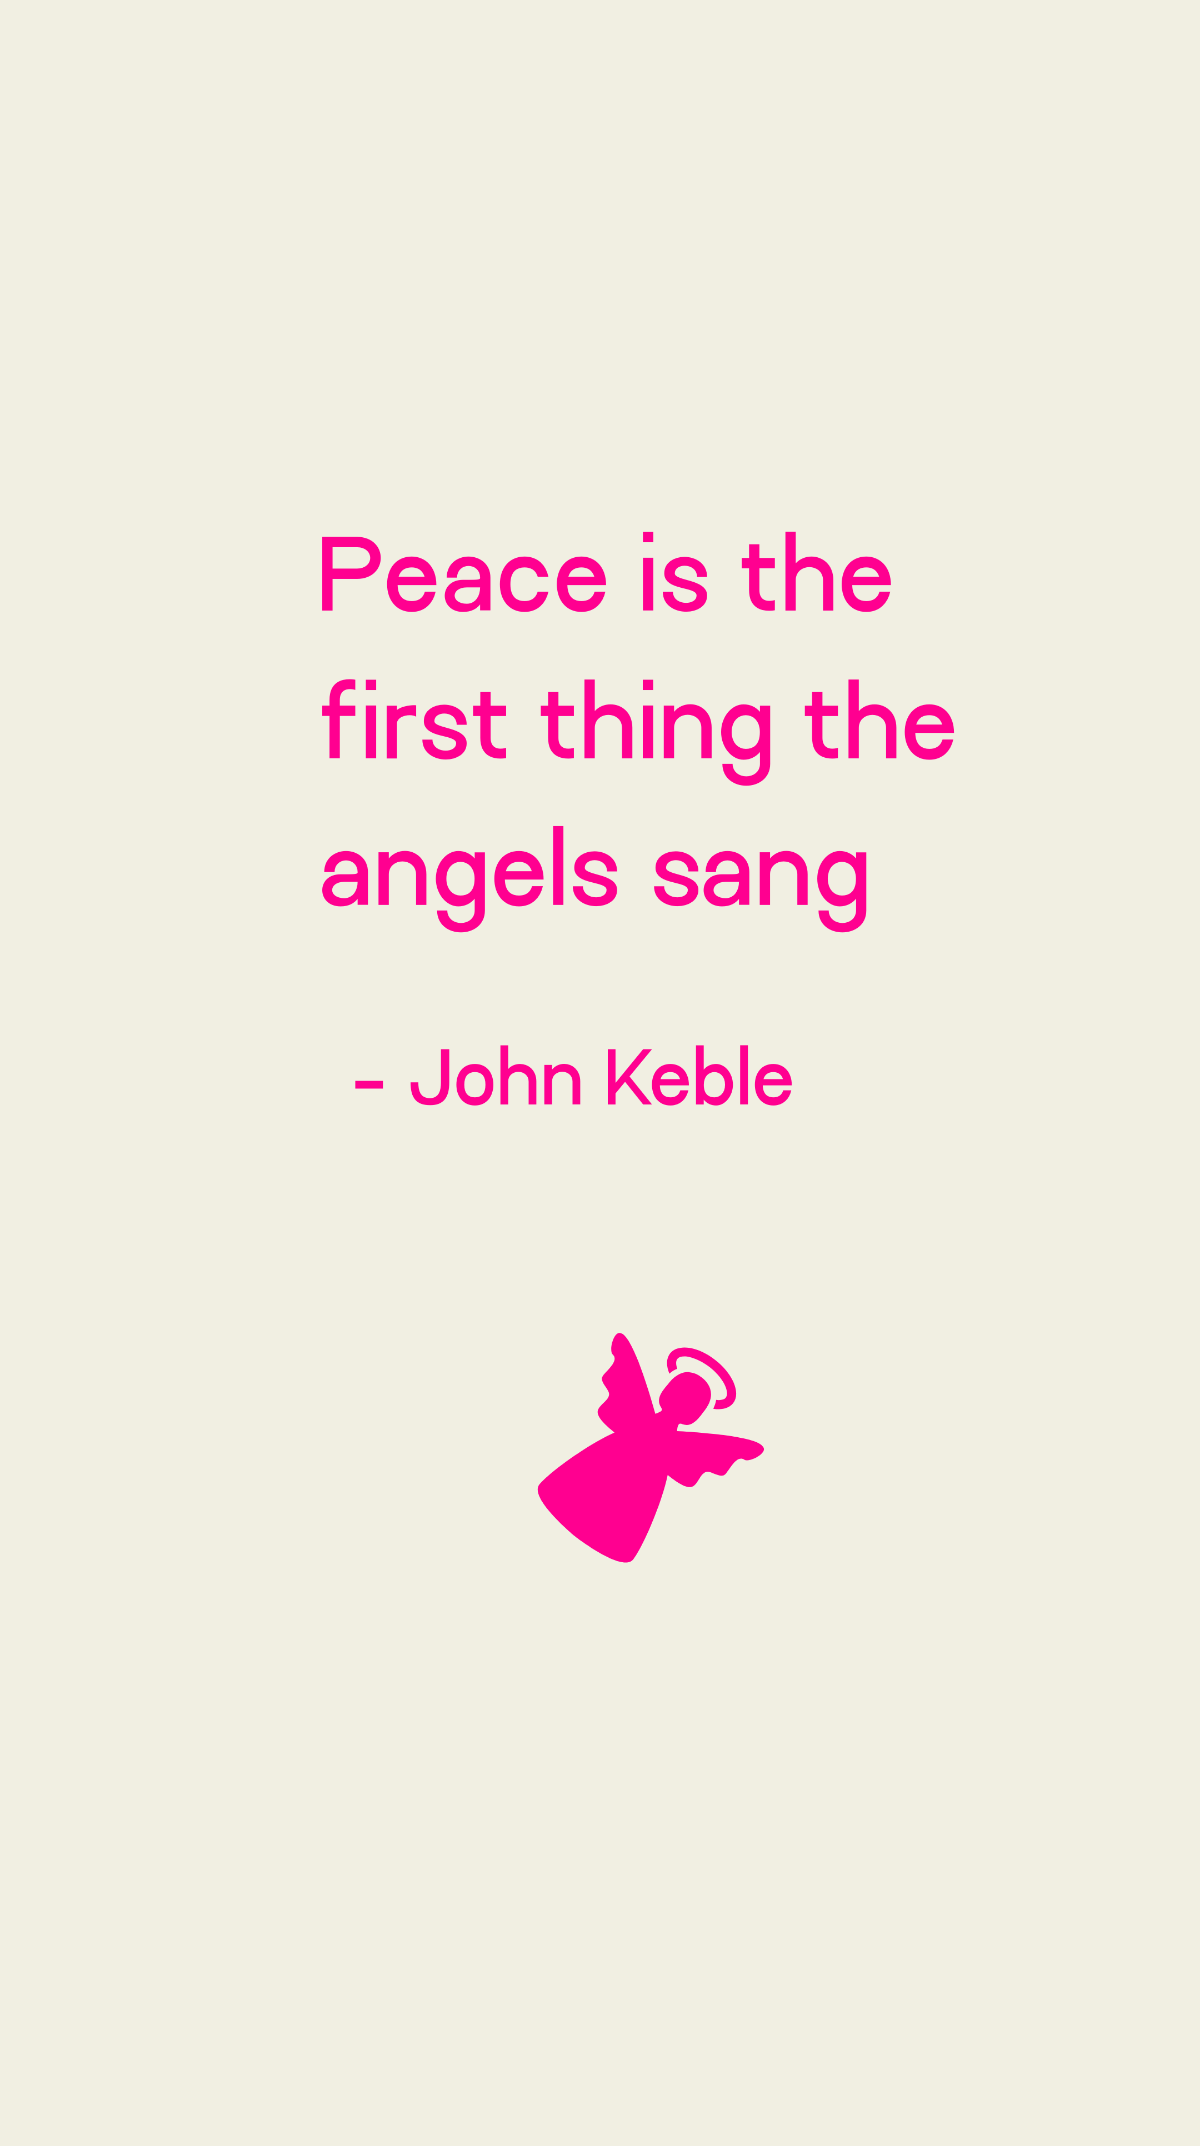 John Keble - Peace is the first thing the angels sang